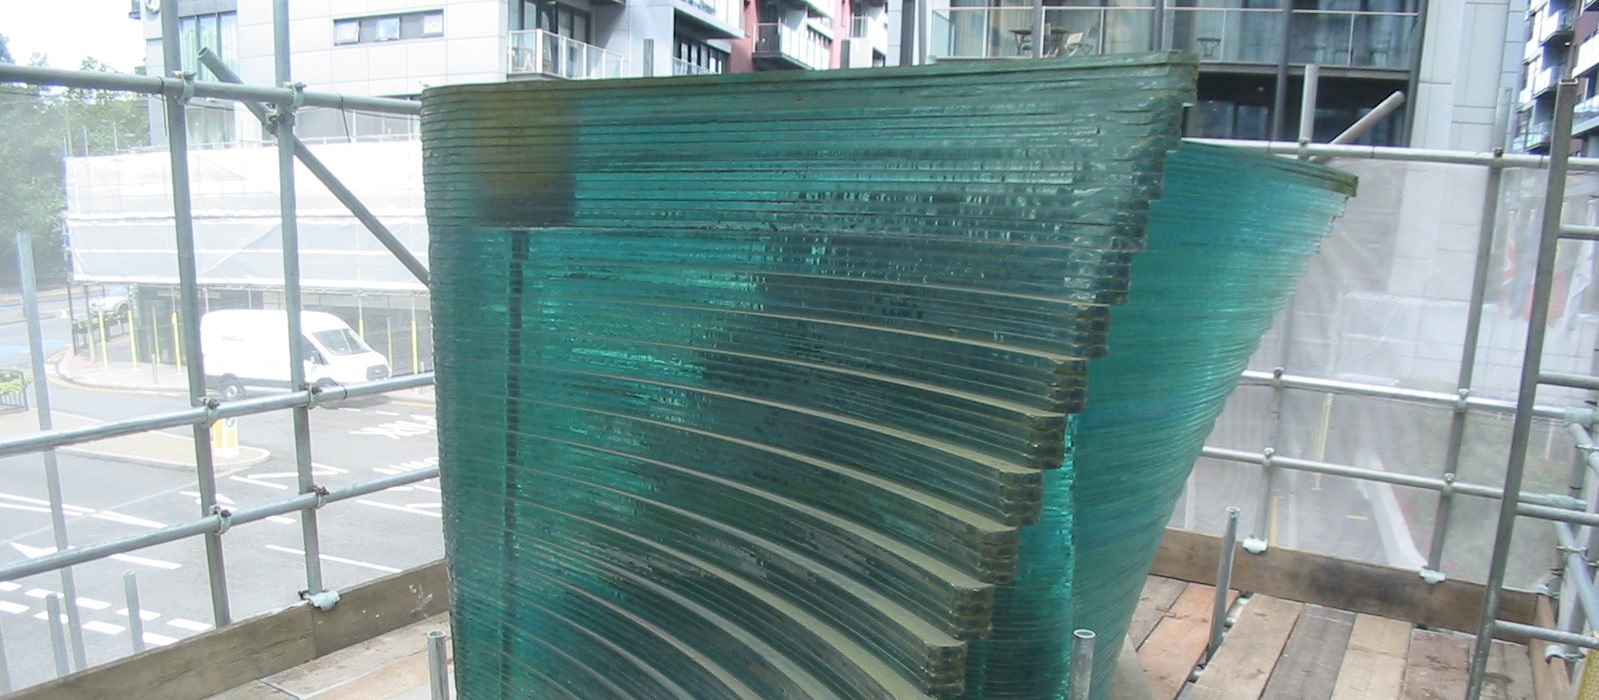 Testing of glass structures